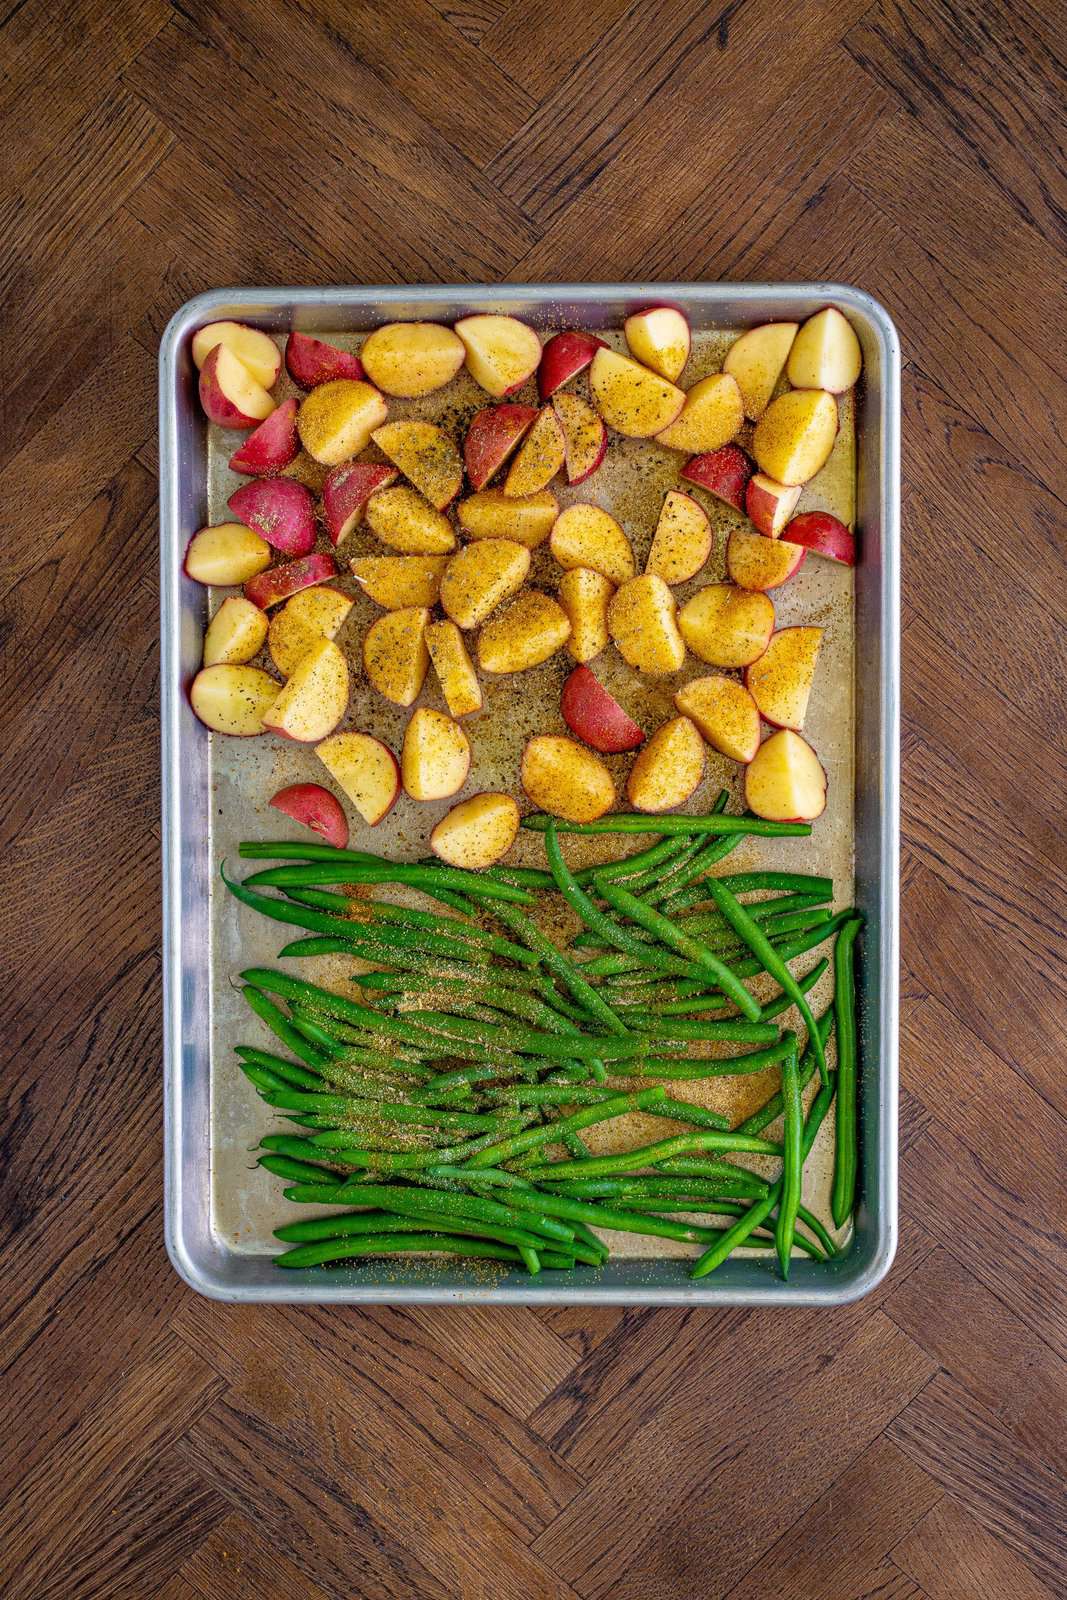 Seasoning sprinkled over potatoes and green beans on sheet pan.